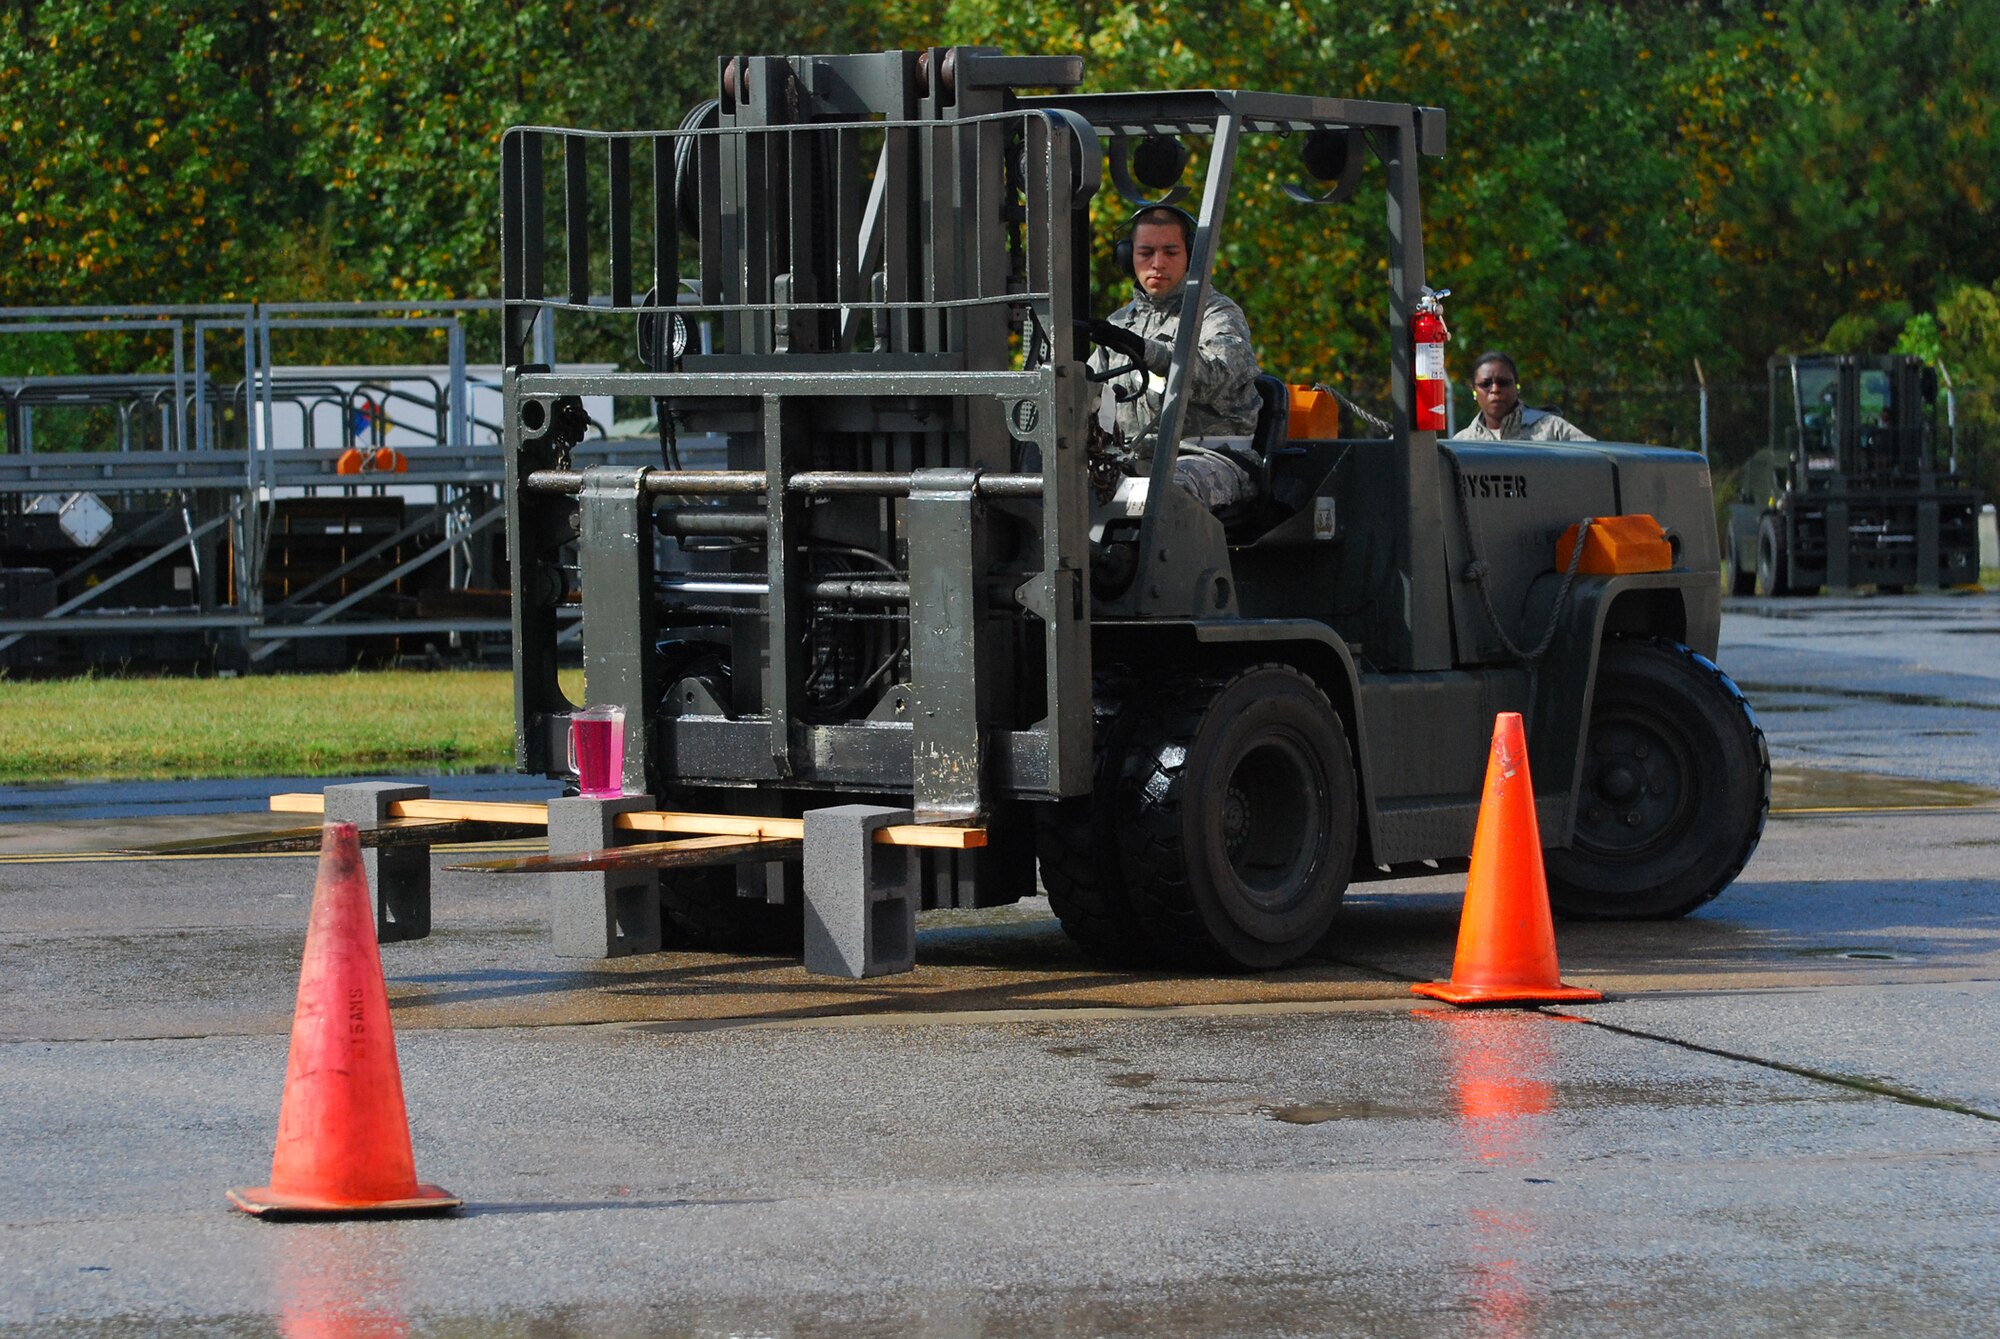 DOBBINS AIR RESERVE BASE, Ga. -- Staff Sgt. Diego Jainez, 69th Aerial Port Squadron, maneuvers a forklift while carrying a pitcher full of water that could not be spilled during a competition event at the Air Force Reserve Command's Port Dawg Challenge here Oct. 27. The inaugural event pitted 23 different Reserve units against each other in a weeklong competition that tested the skills of aerial port Airmen. (U.S. Air Force photo/Tech. Sgt. Steve Lewis)